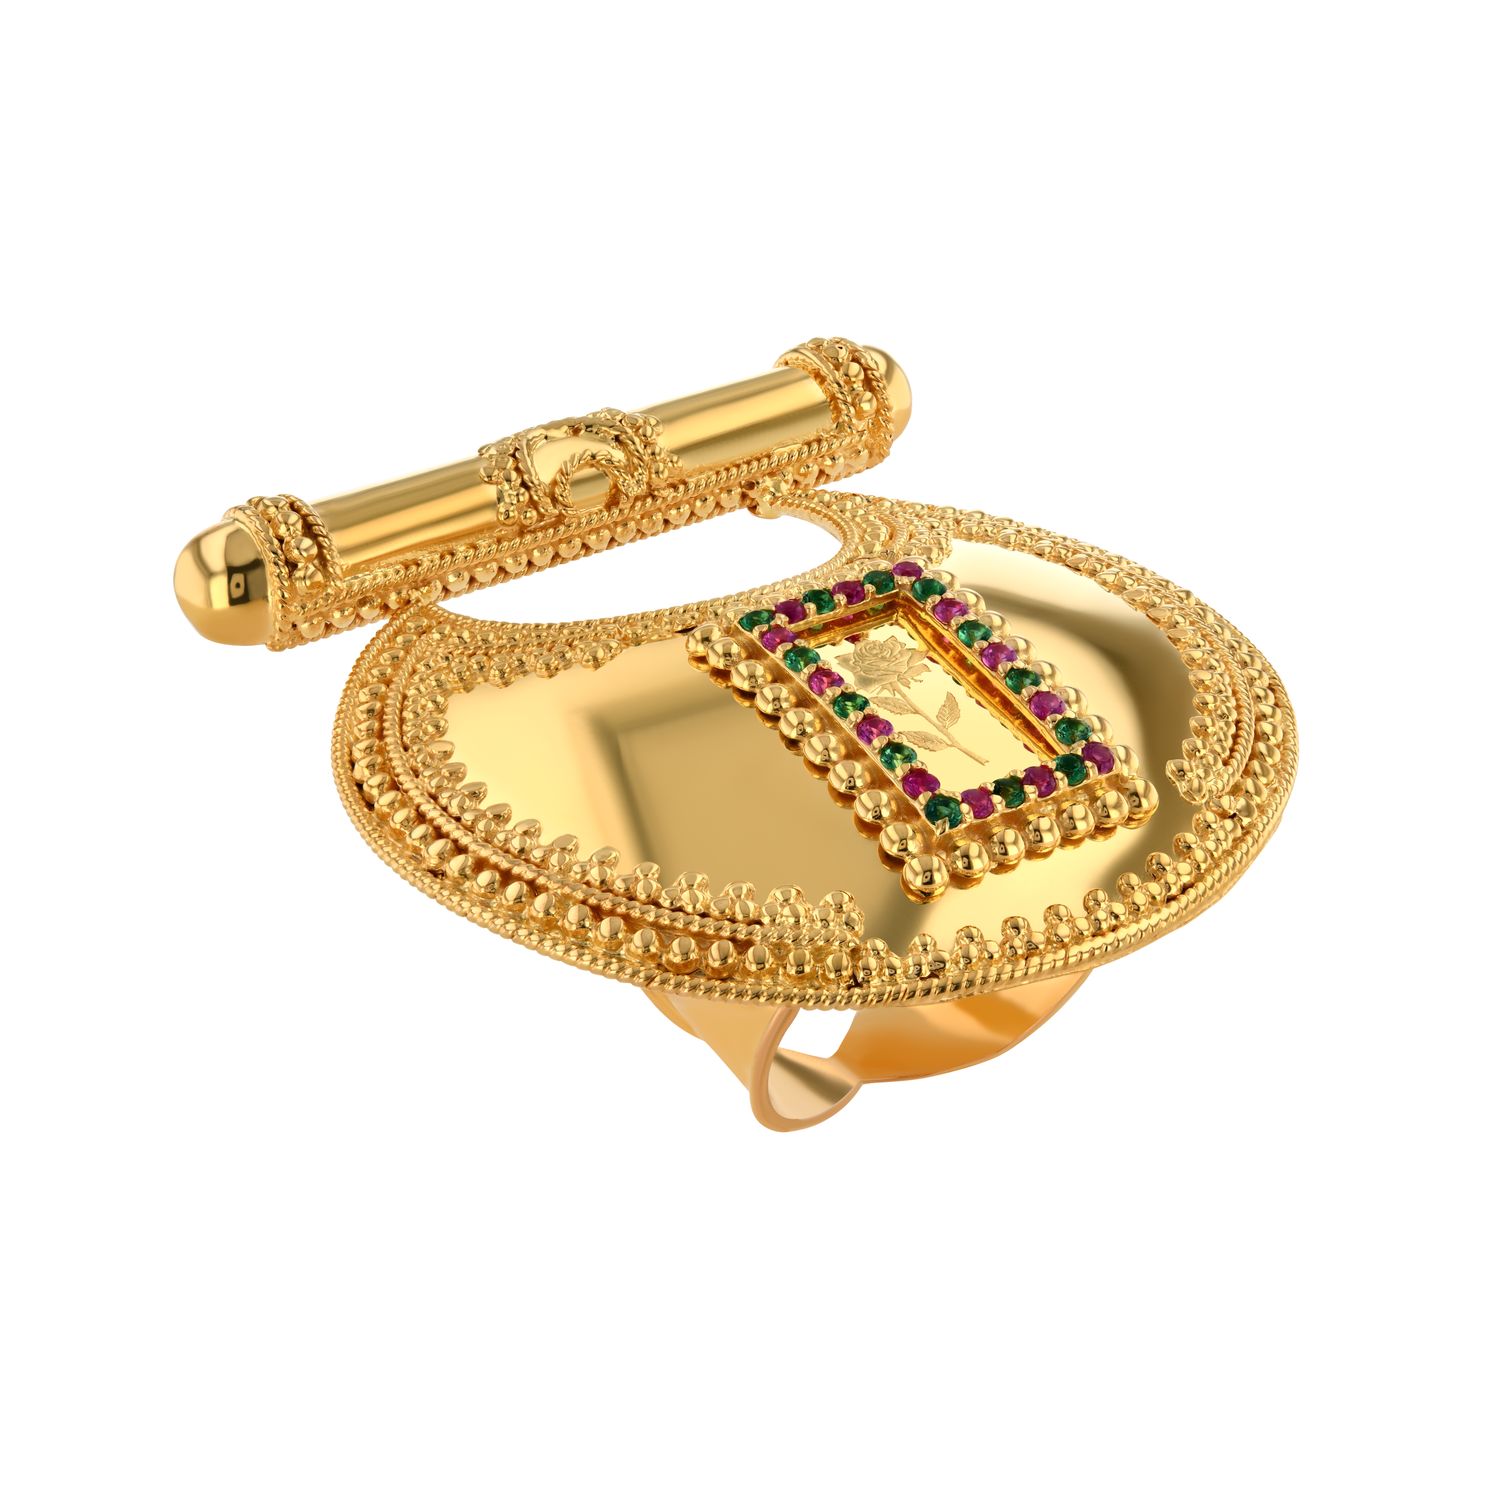 21K Traditional Gold Set With 24K Gold Bars